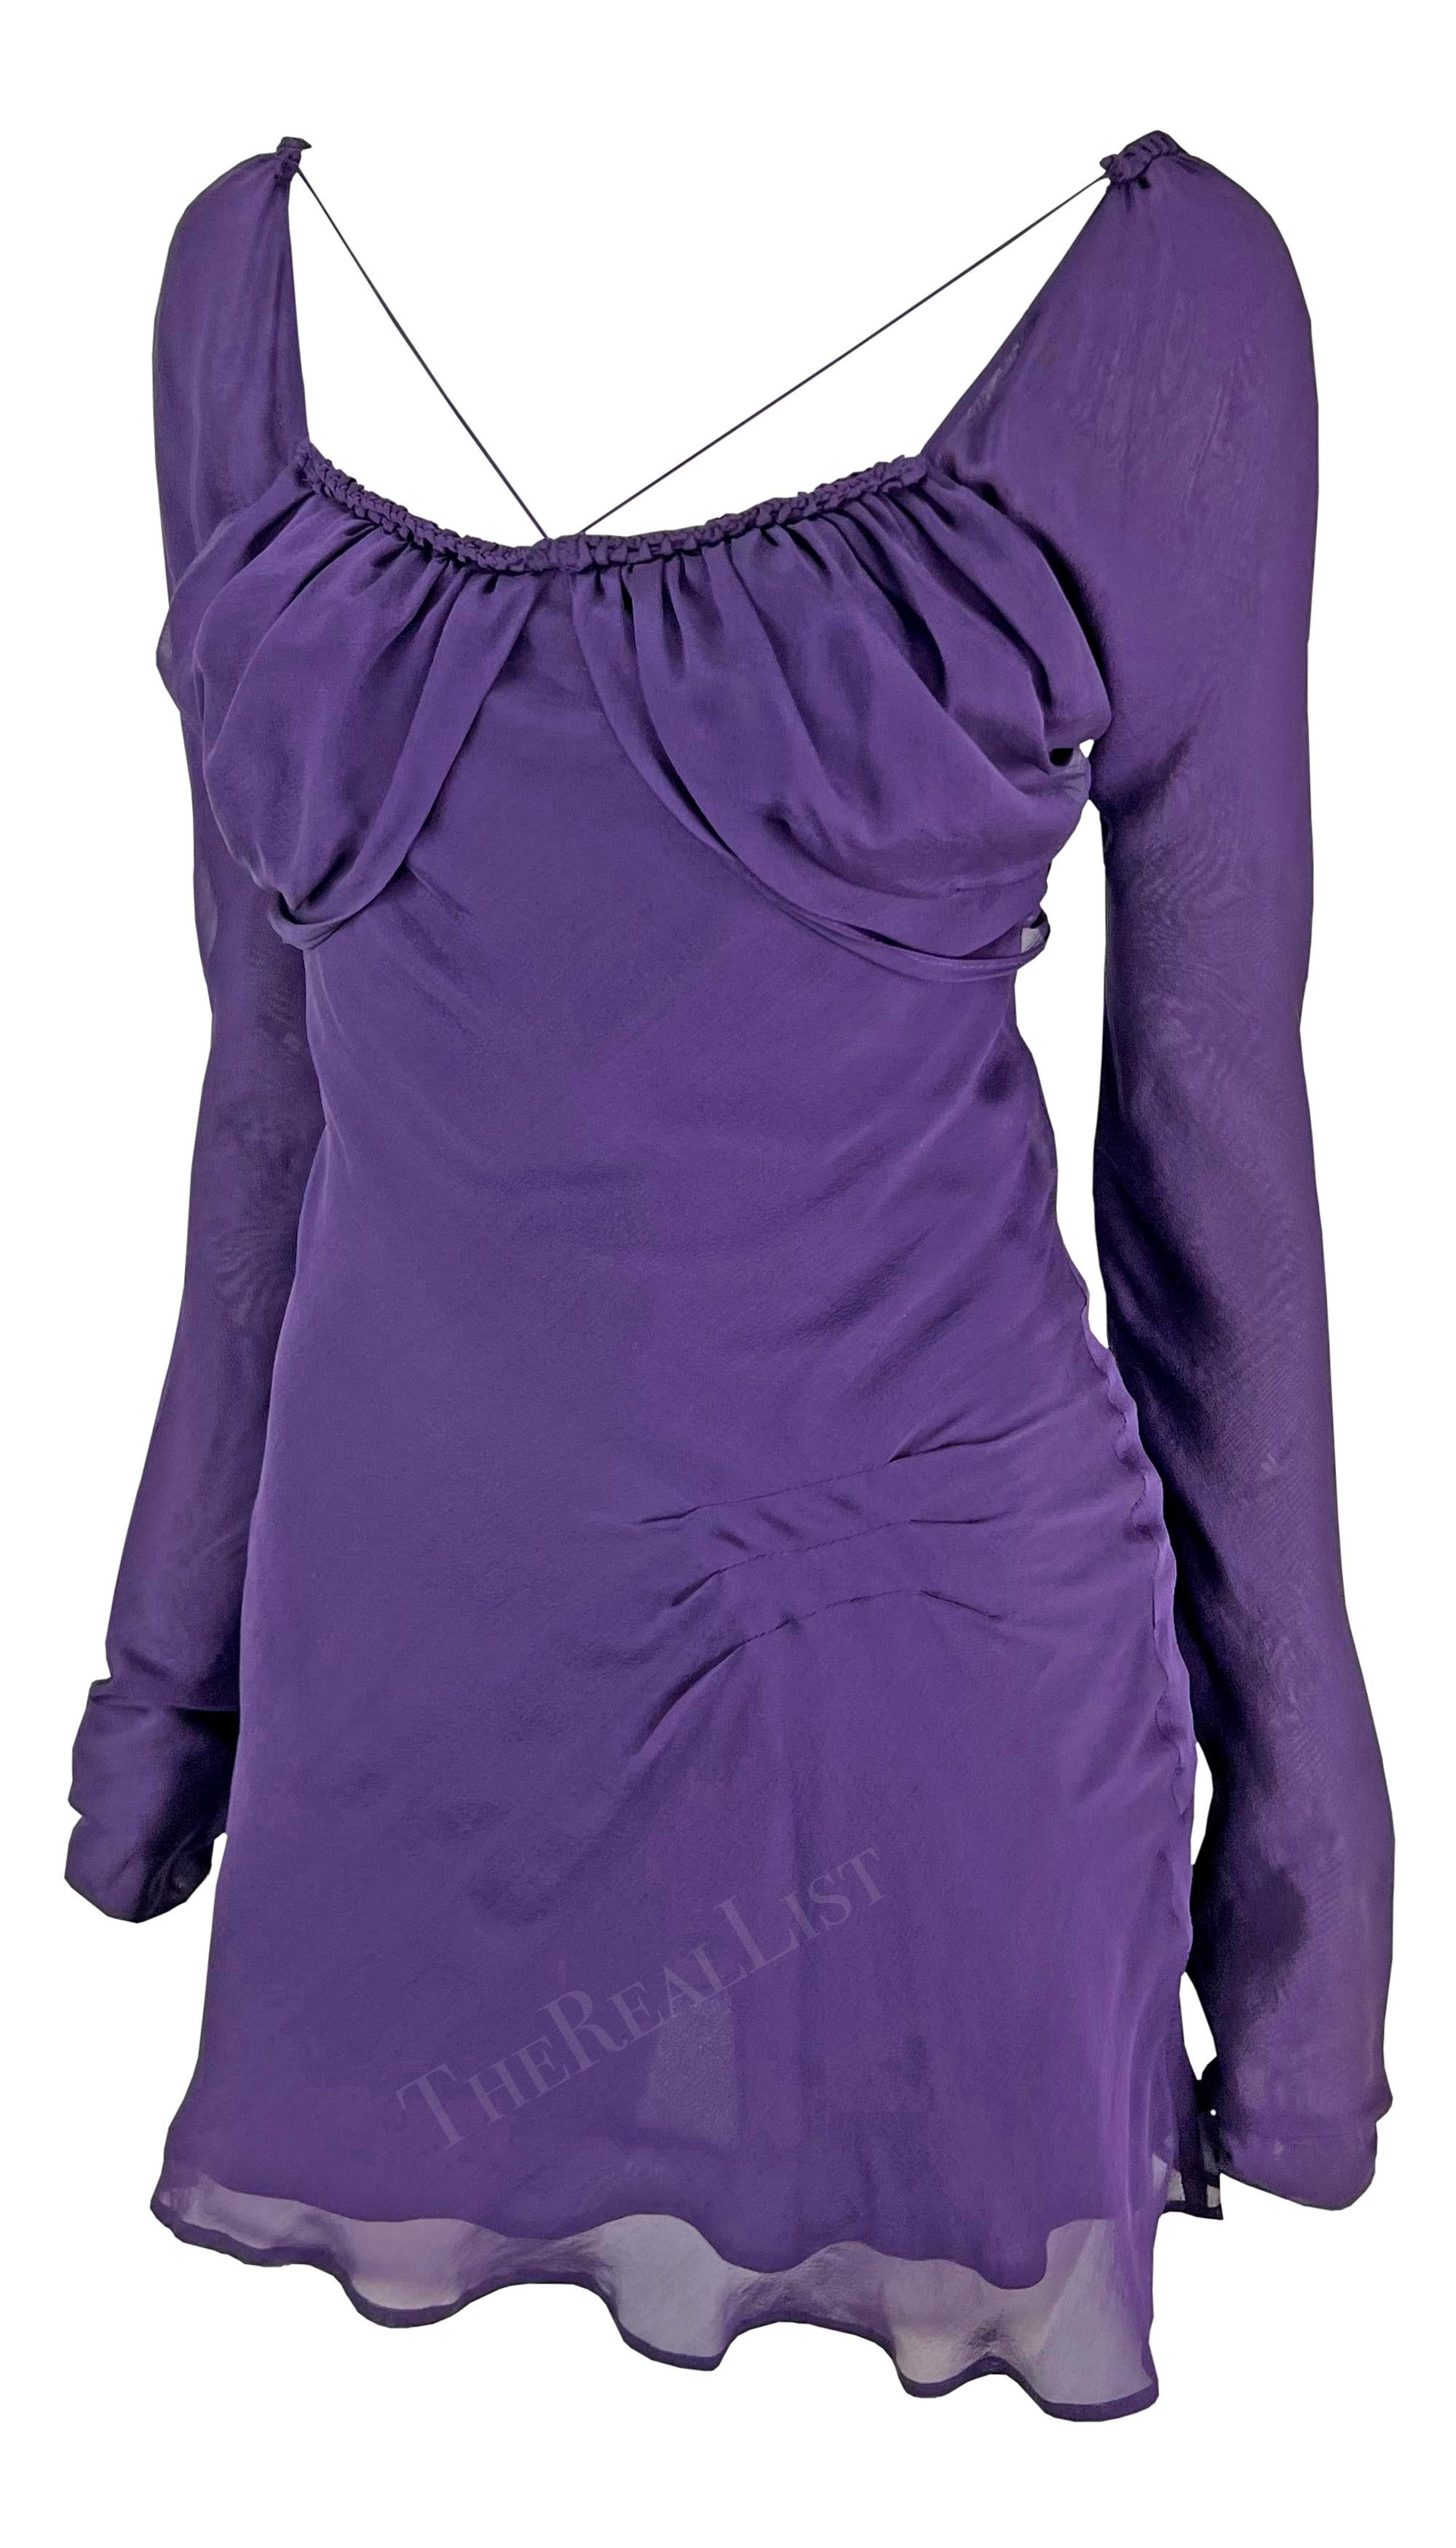 Presenting a chic deep purple Gucci mini dress, designed by Tom Ford. From the Spring/Summer 2003 collection, this silk mini dress features ruching at the bust, a gathered accent at the front, a flared skirt, and long sleeves. This fabulous dress is